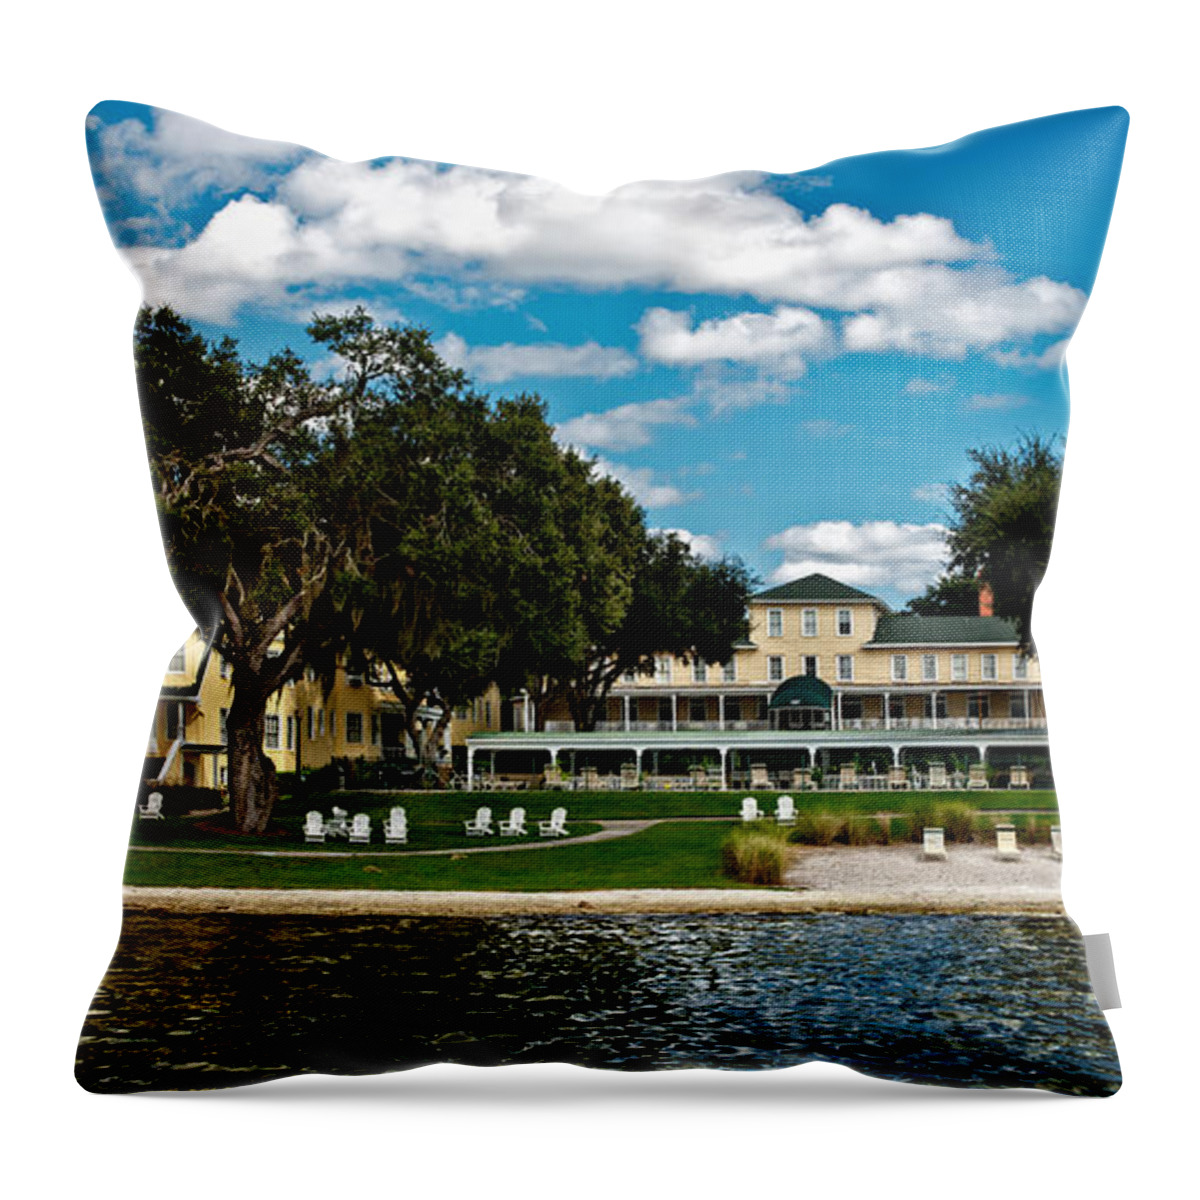 Lakeside Inn Throw Pillow featuring the photograph Lakeside Inn by Christopher Holmes